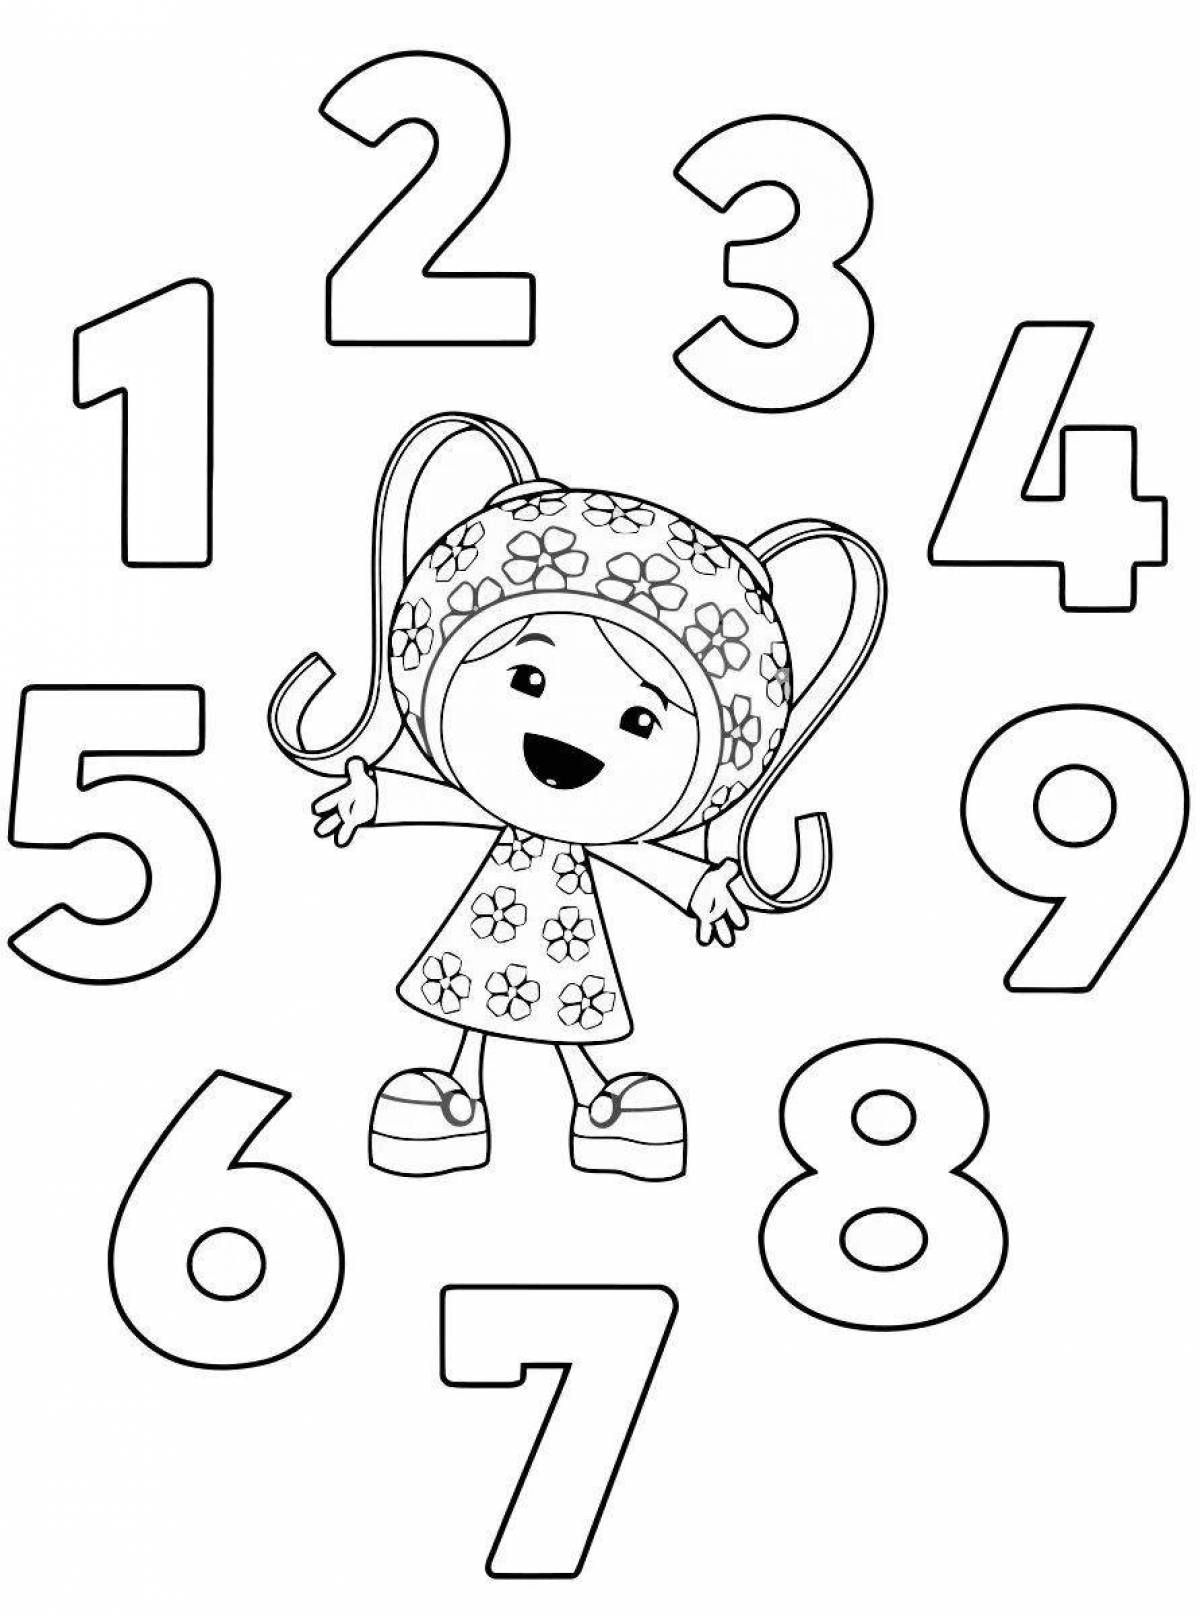 Numbers for 3 year olds #3